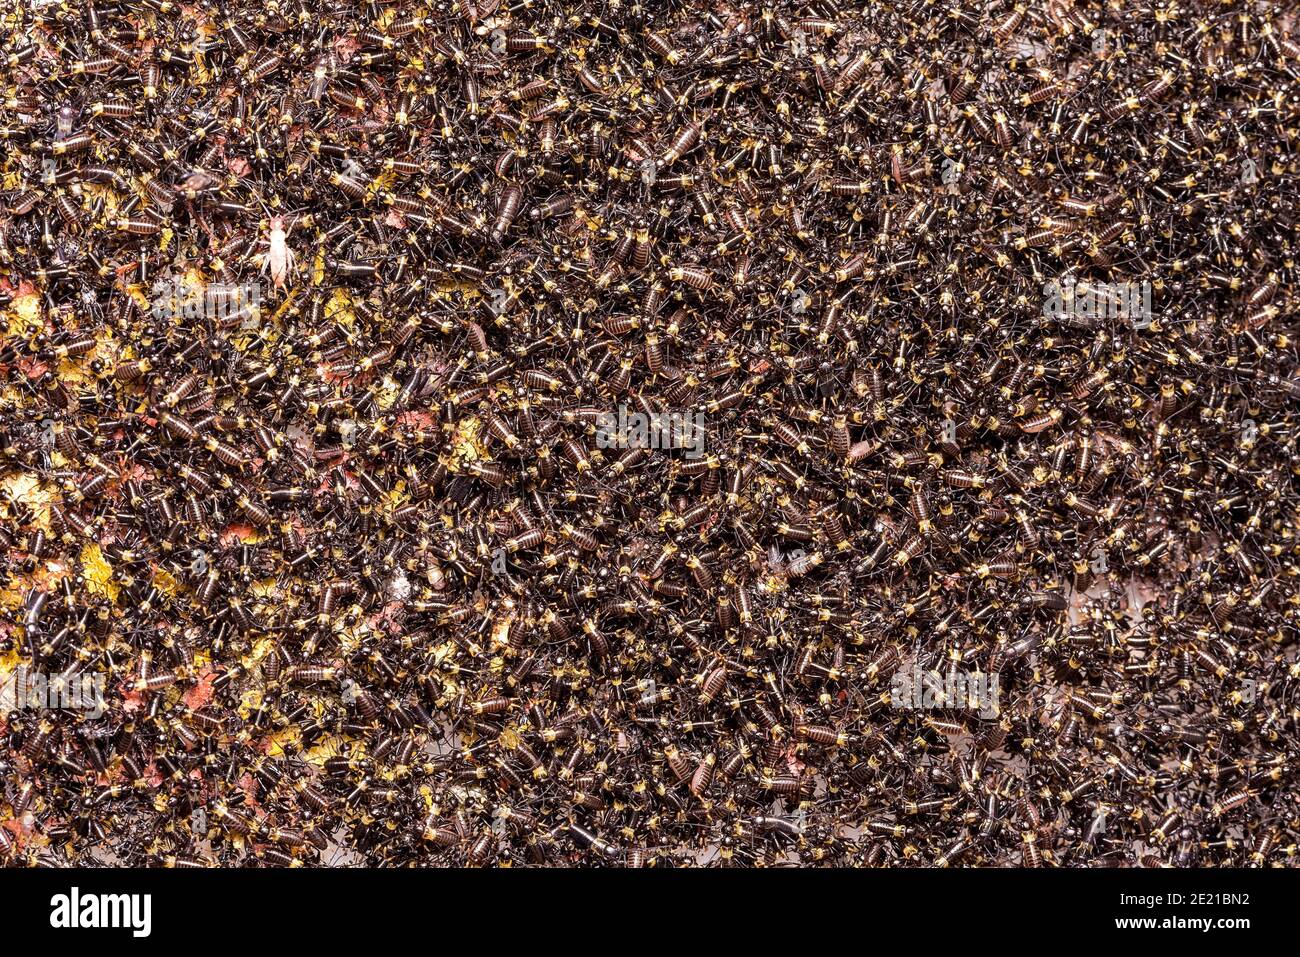 Small crickets just after hatching. Breeding of crickets. Food insects close up on a macro scale. Stock Photo